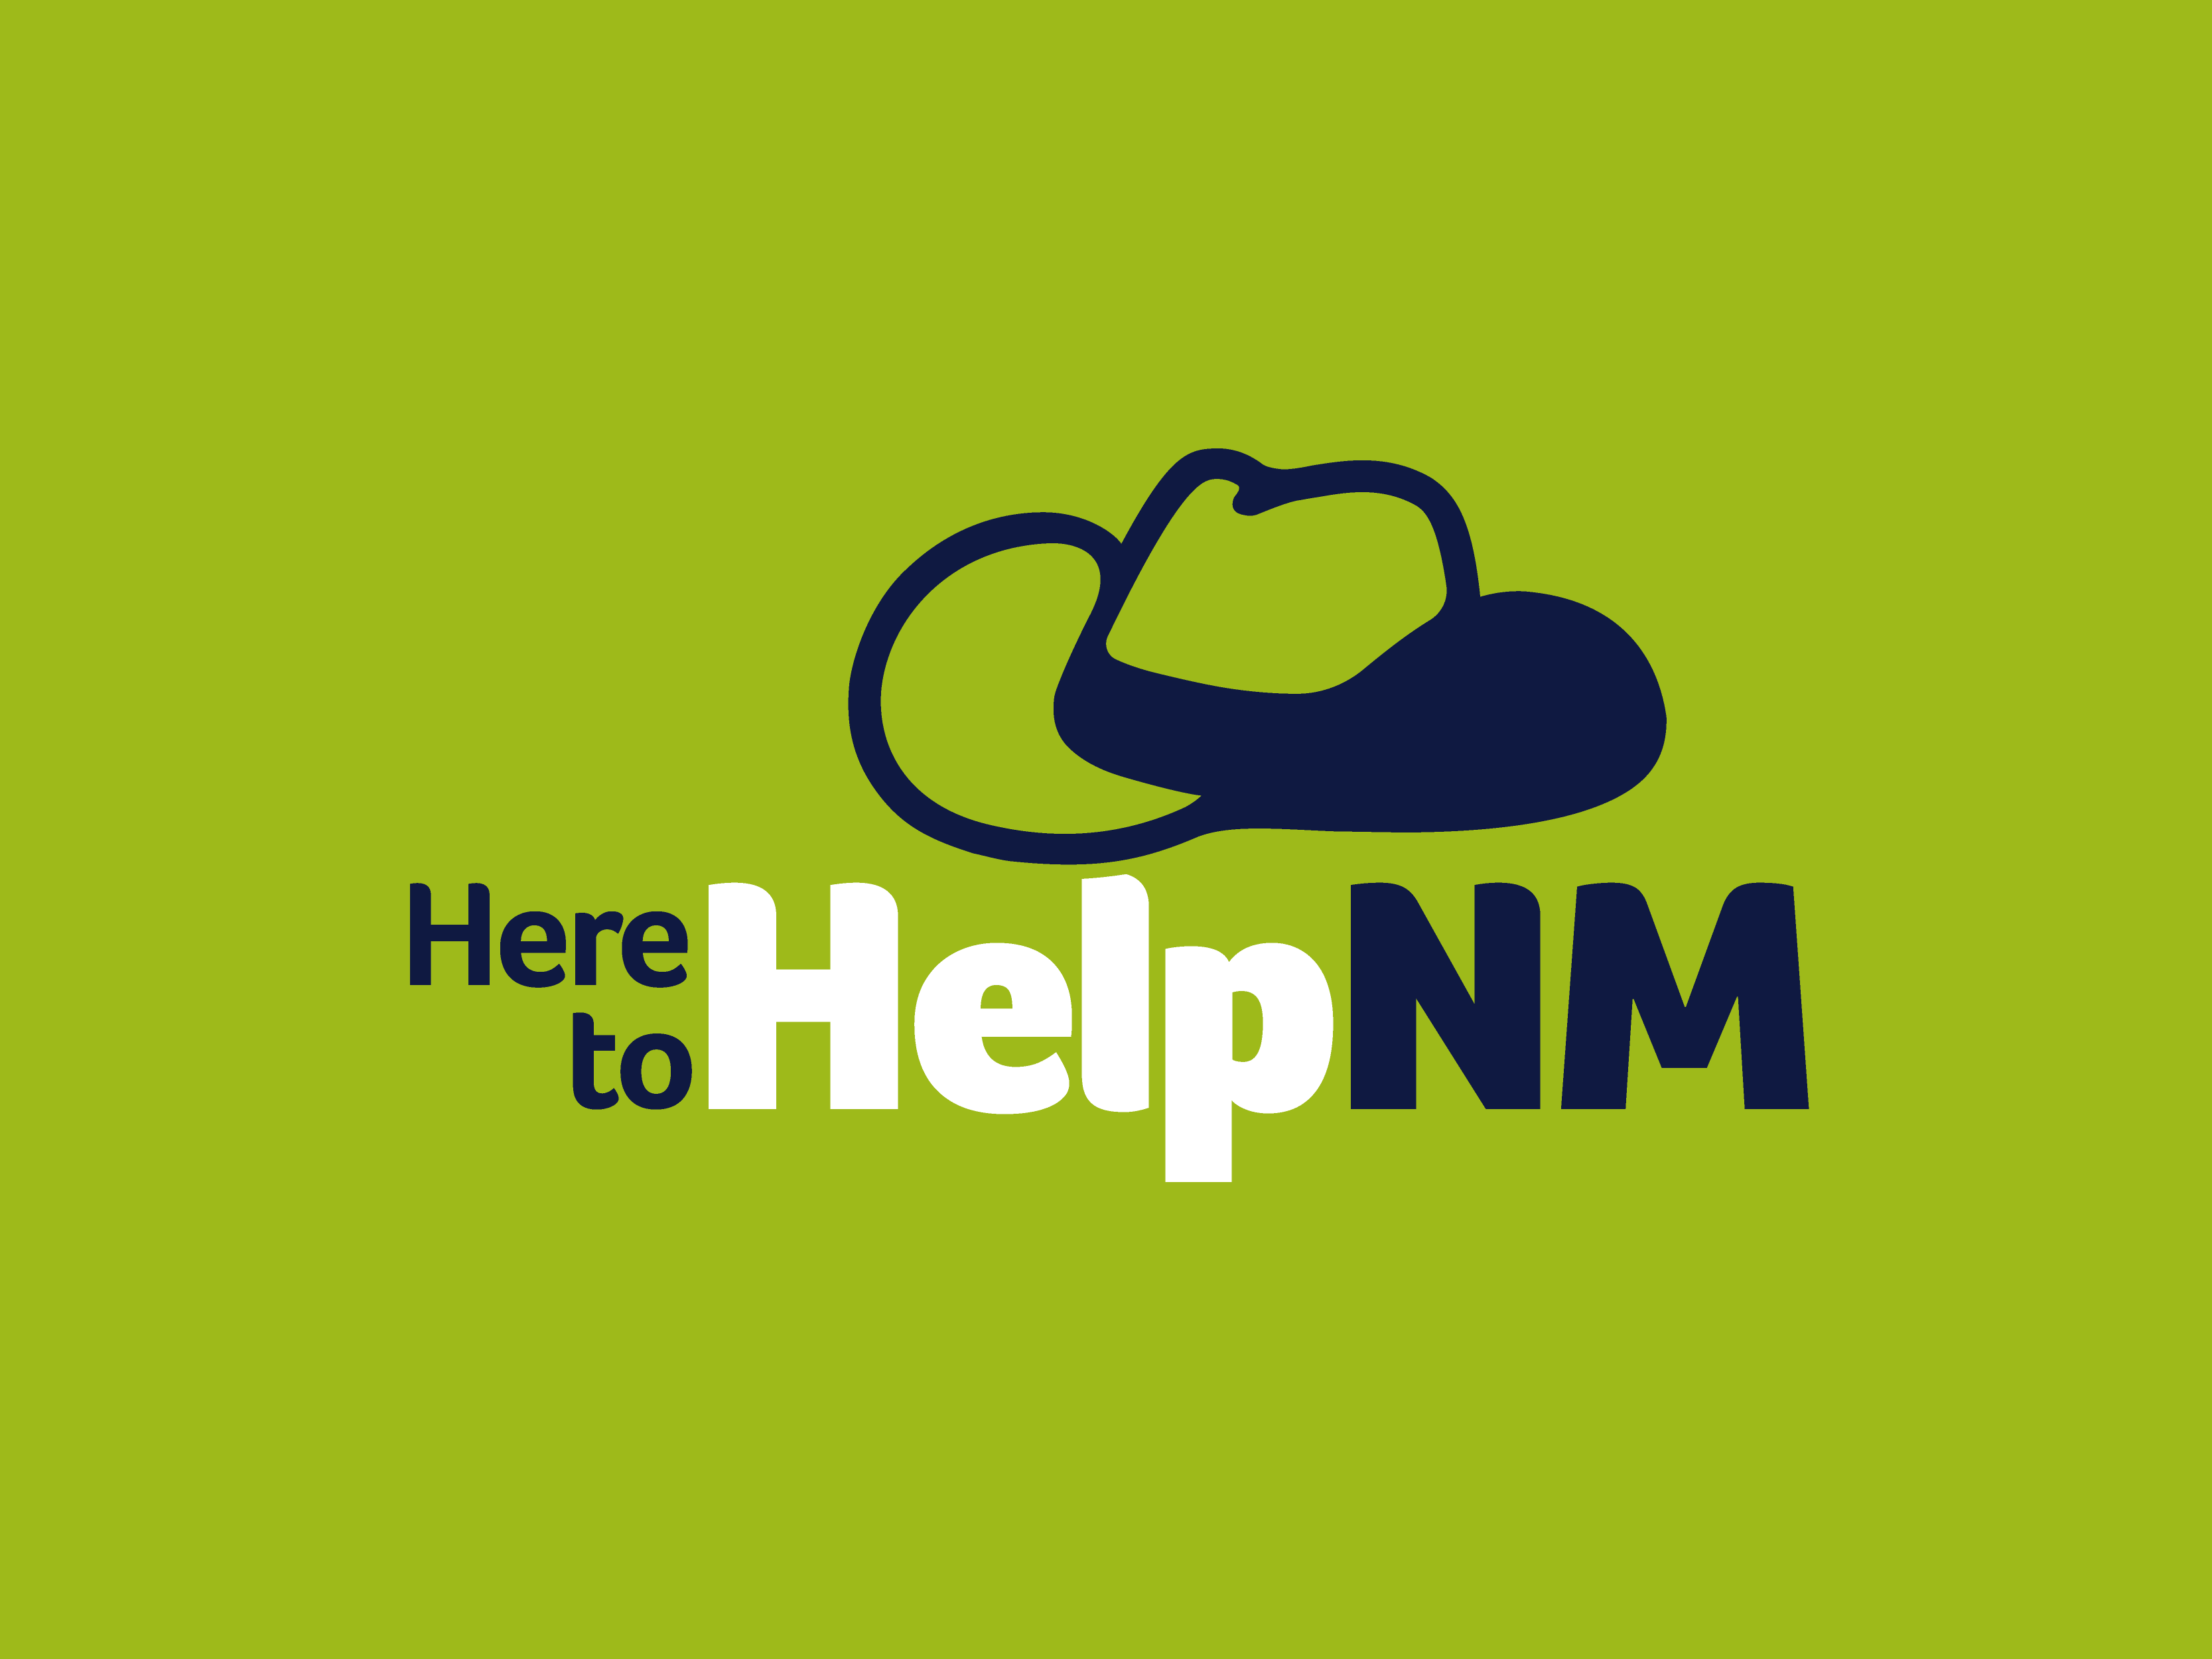 A green logo including the text “Here to Help NM” and an image of a cowboy hat.